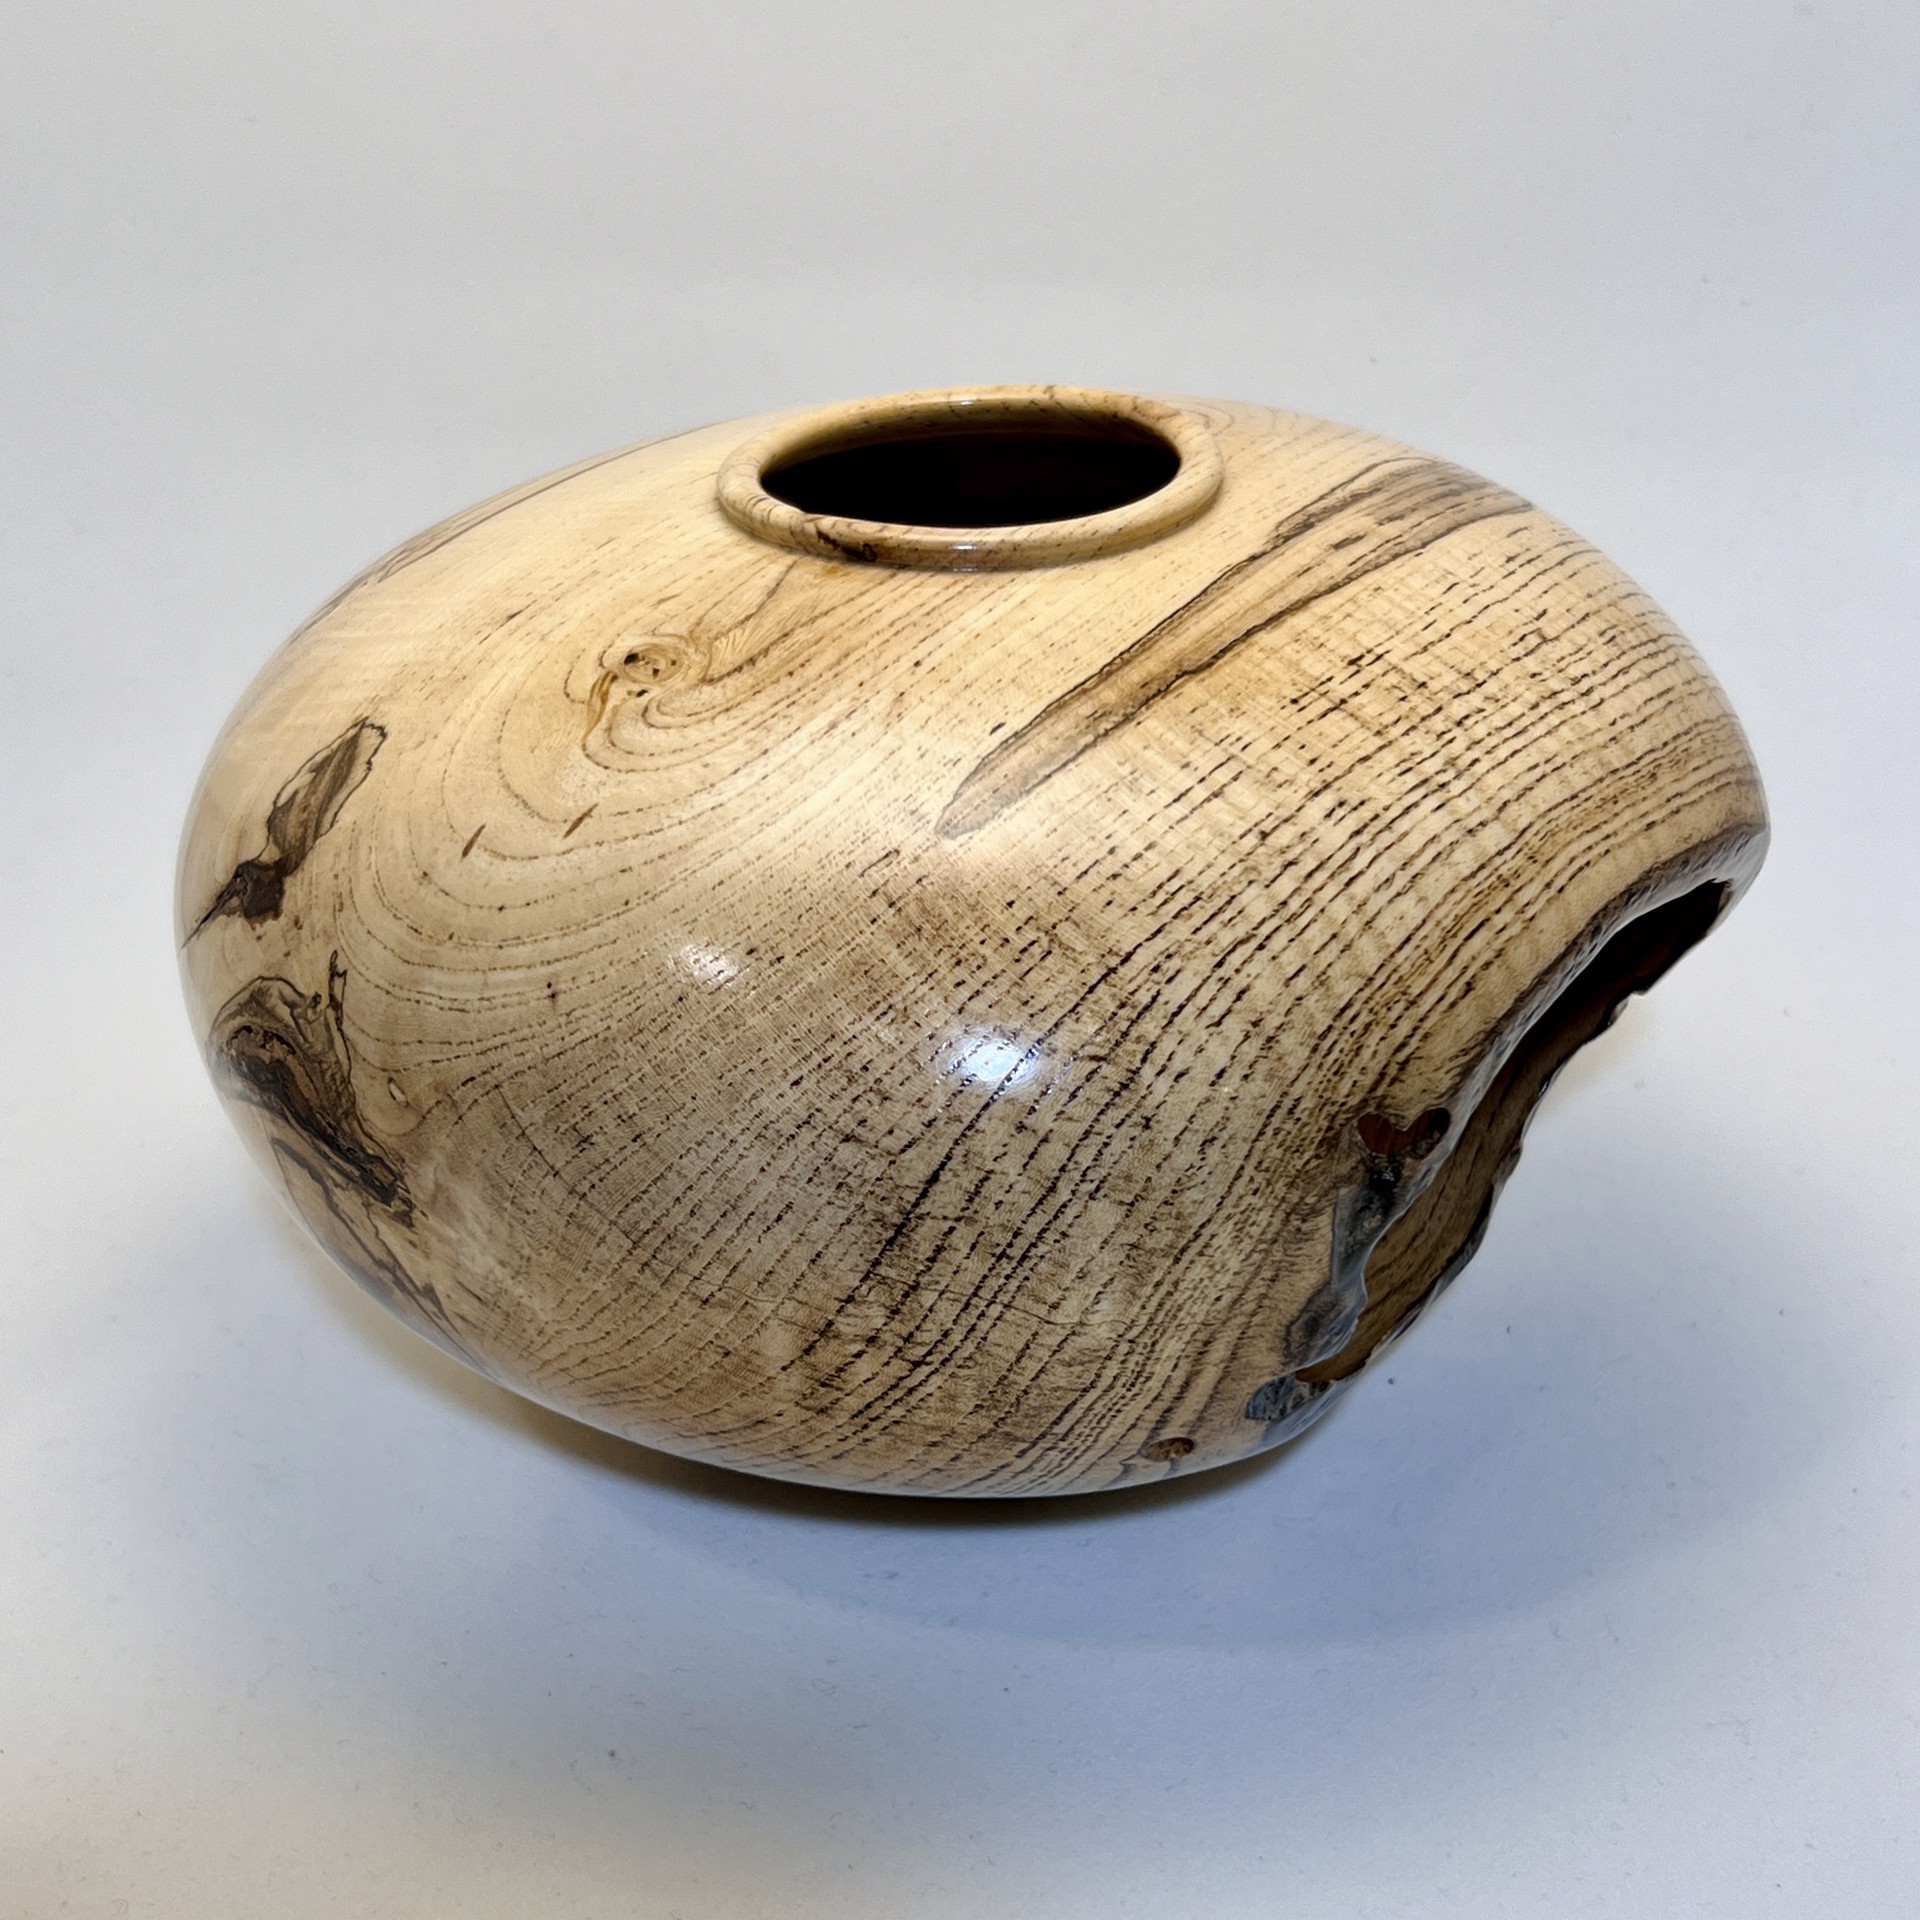 15. Sugar Hackberry Hollow Form With Large Void by Don Kaiser